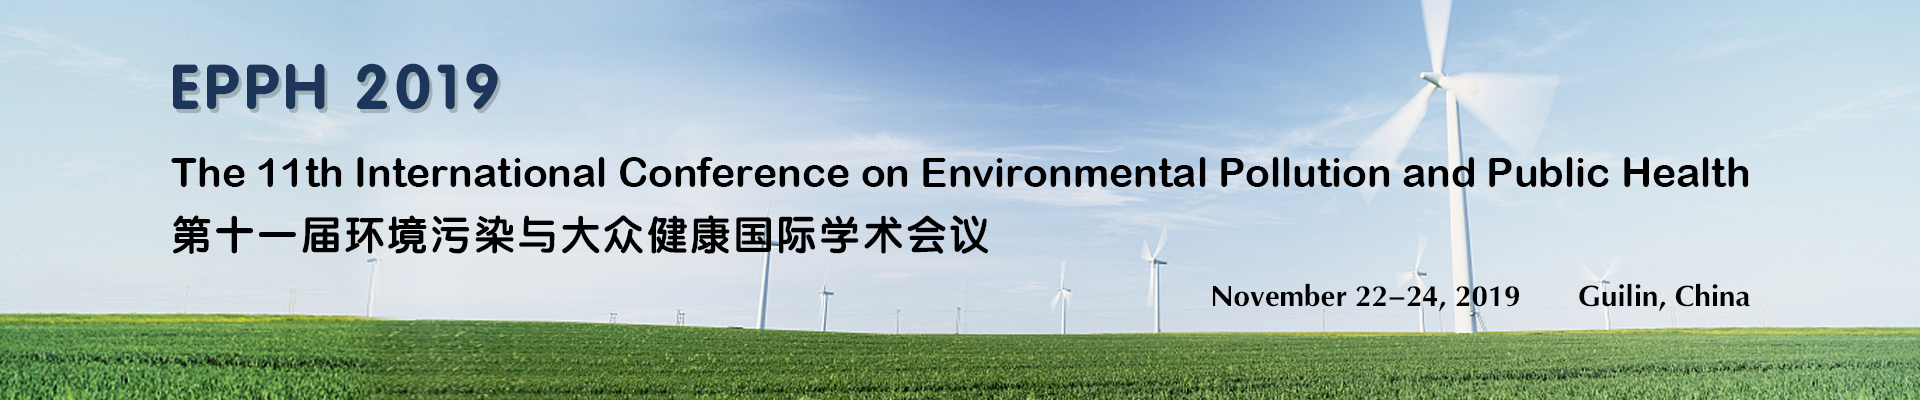 The 11th International Conference on Environmental Pollution and Public Health (EPPH 2019)